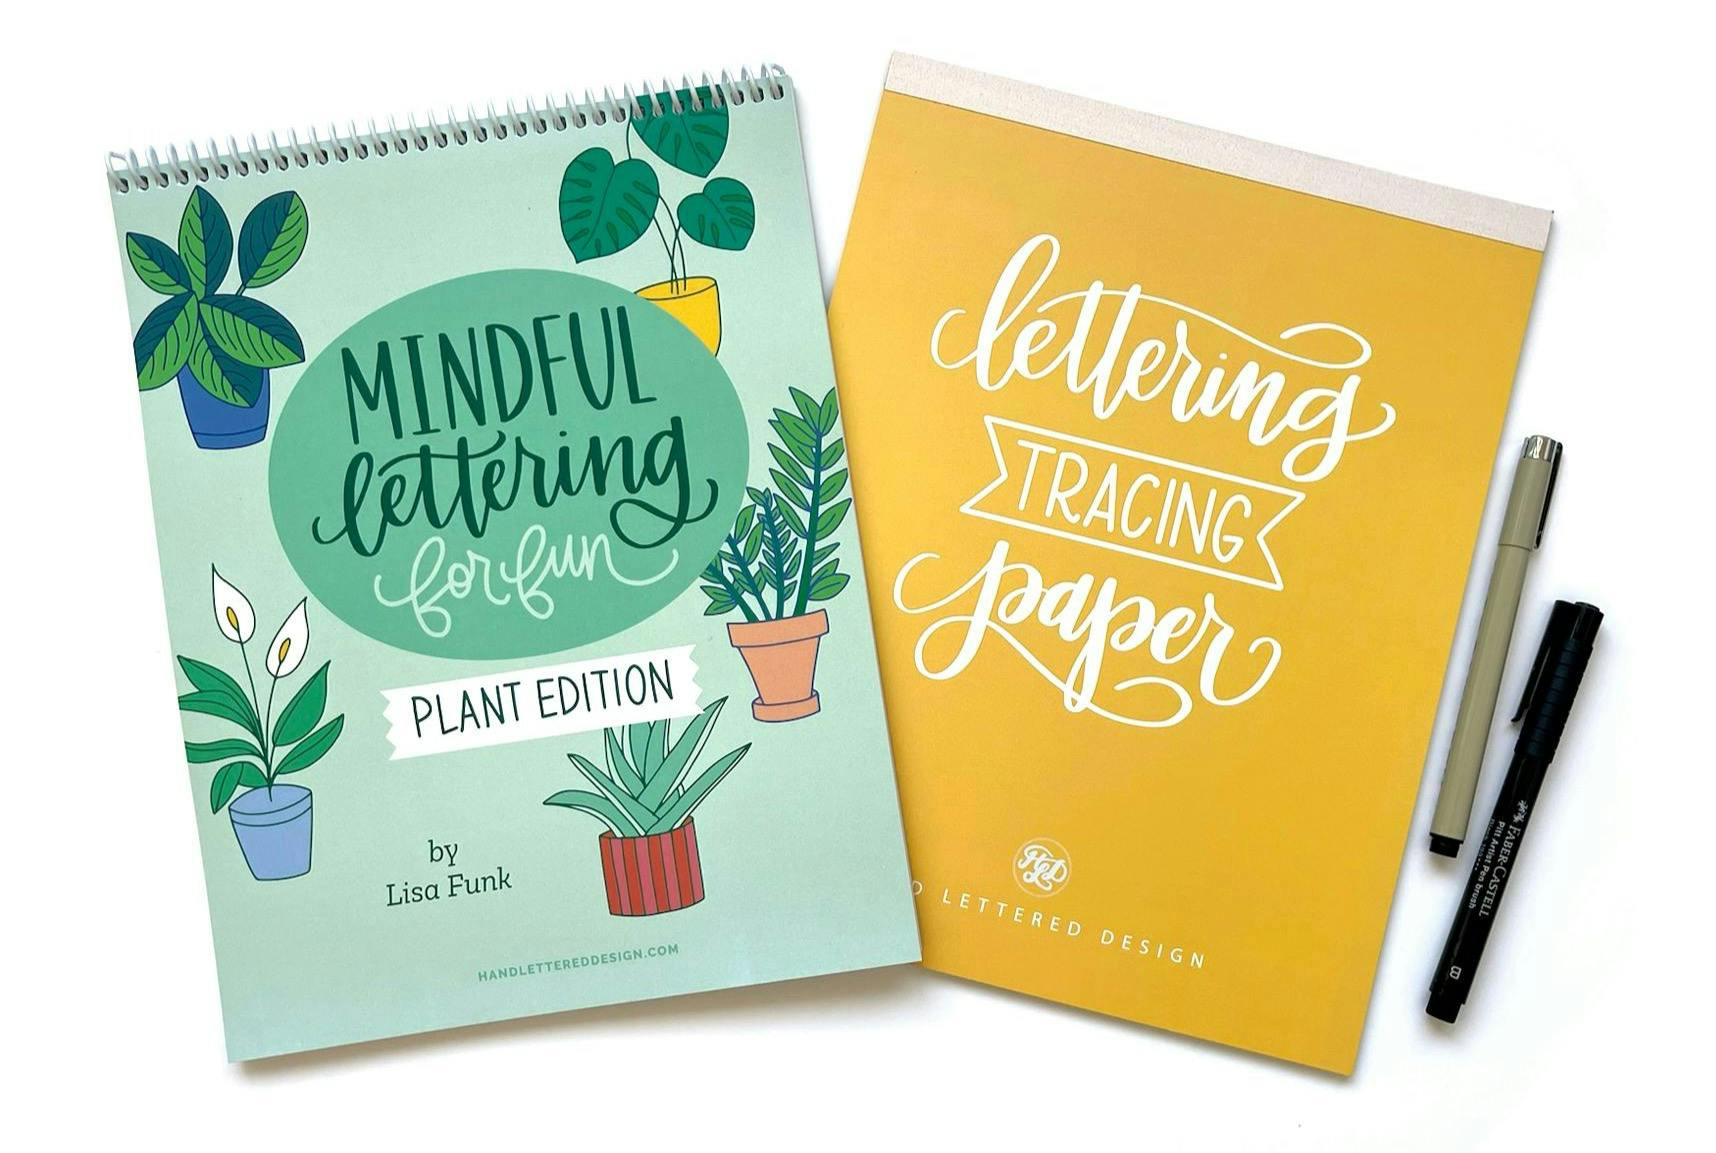 Meet my new book: Mindful Lettering for Fun: Plant Edition! – Hand Lettered  Design